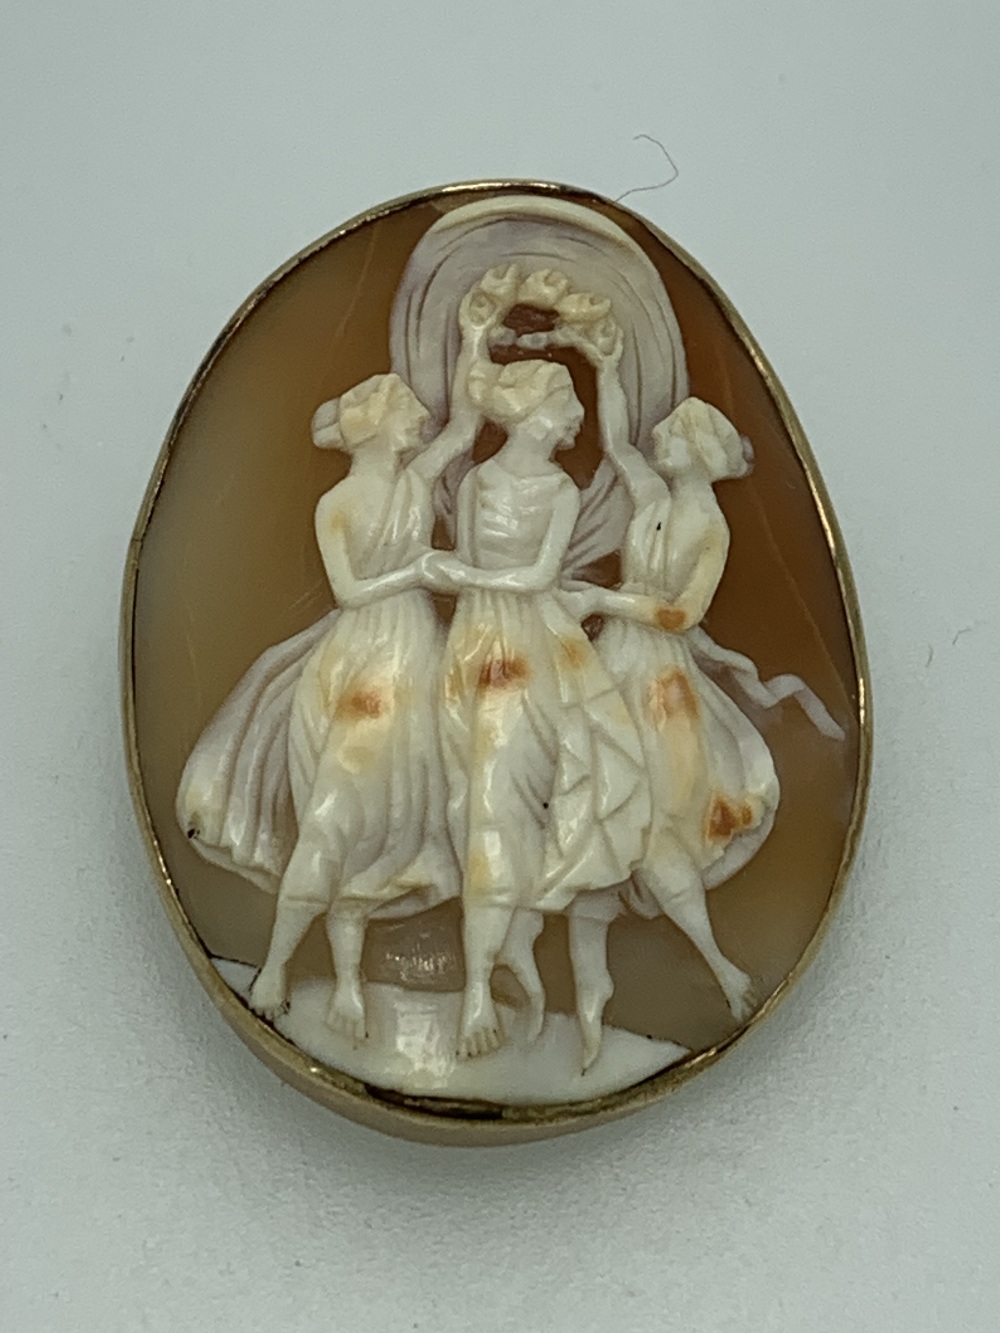 9CT GOLD CLOSED BACK SHELL CARVED CAMEO - possibly The Three Graces, 45 x 35mm, date stamp 1982, - Image 2 of 3